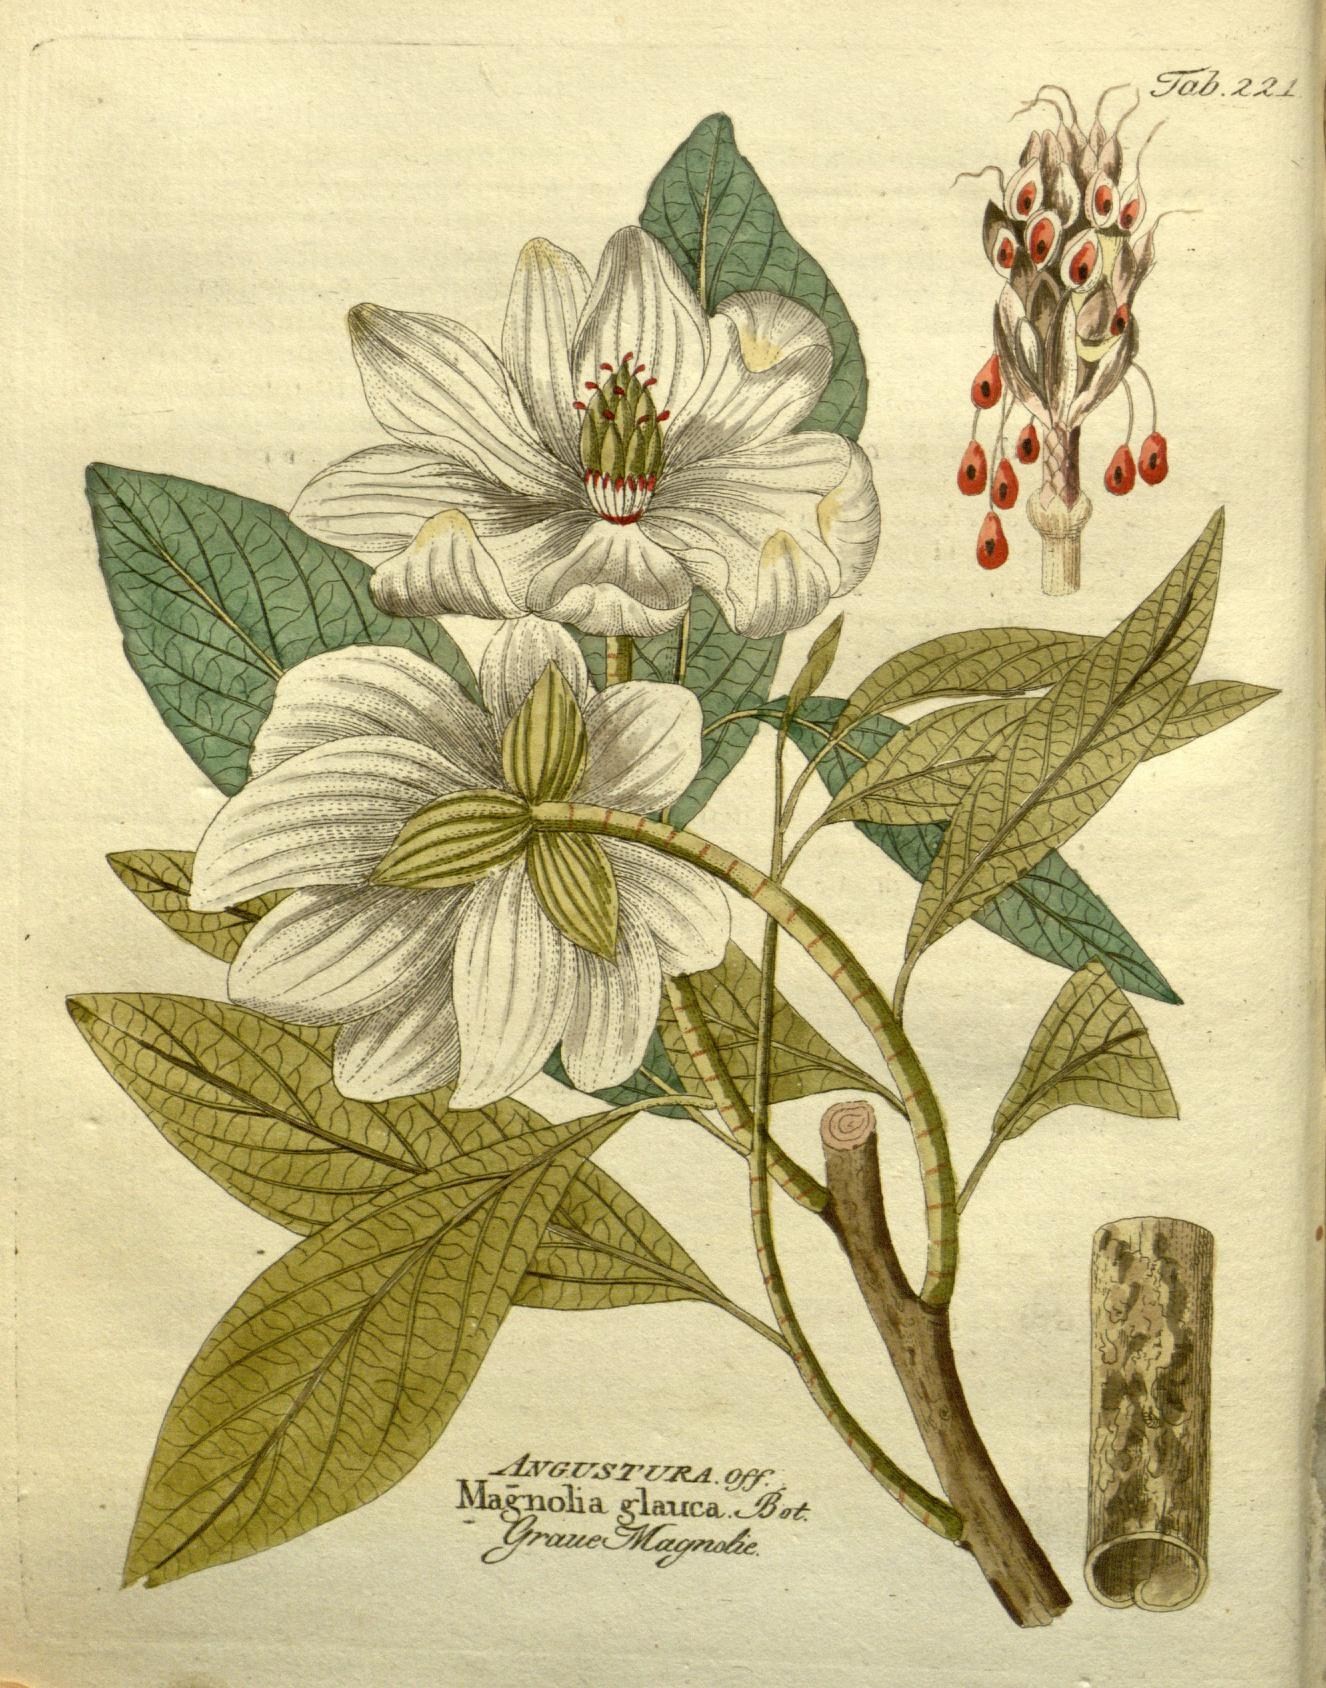 a drawing of two white flowers on a green stem